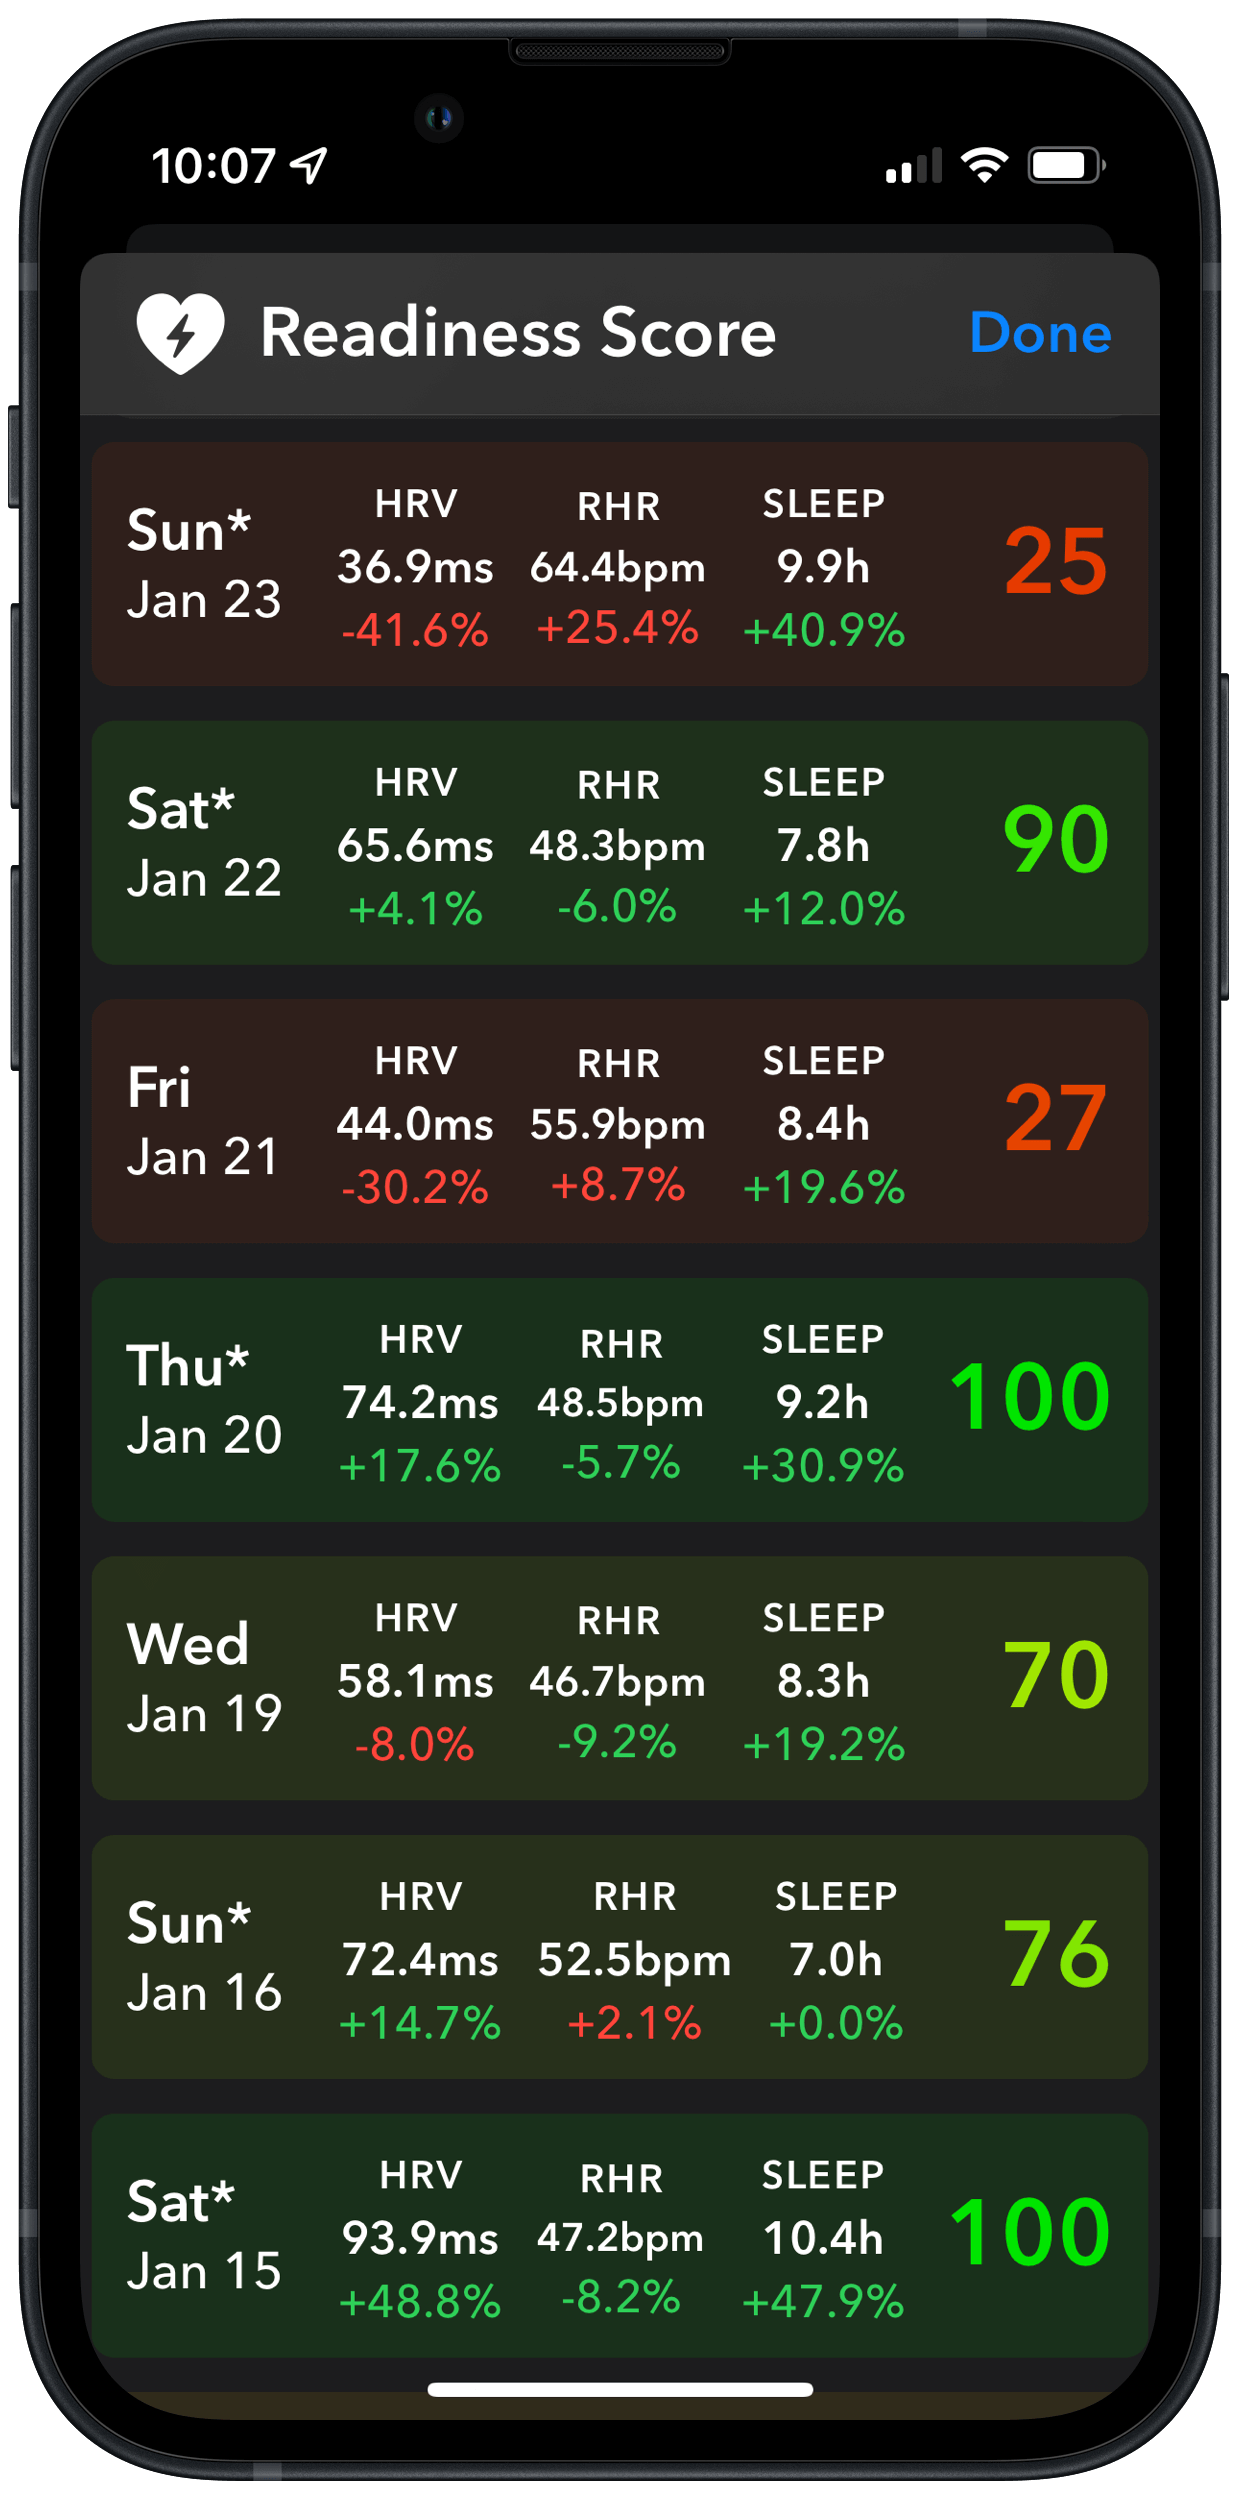 A screenshot showing my readiness scores for the past few days.